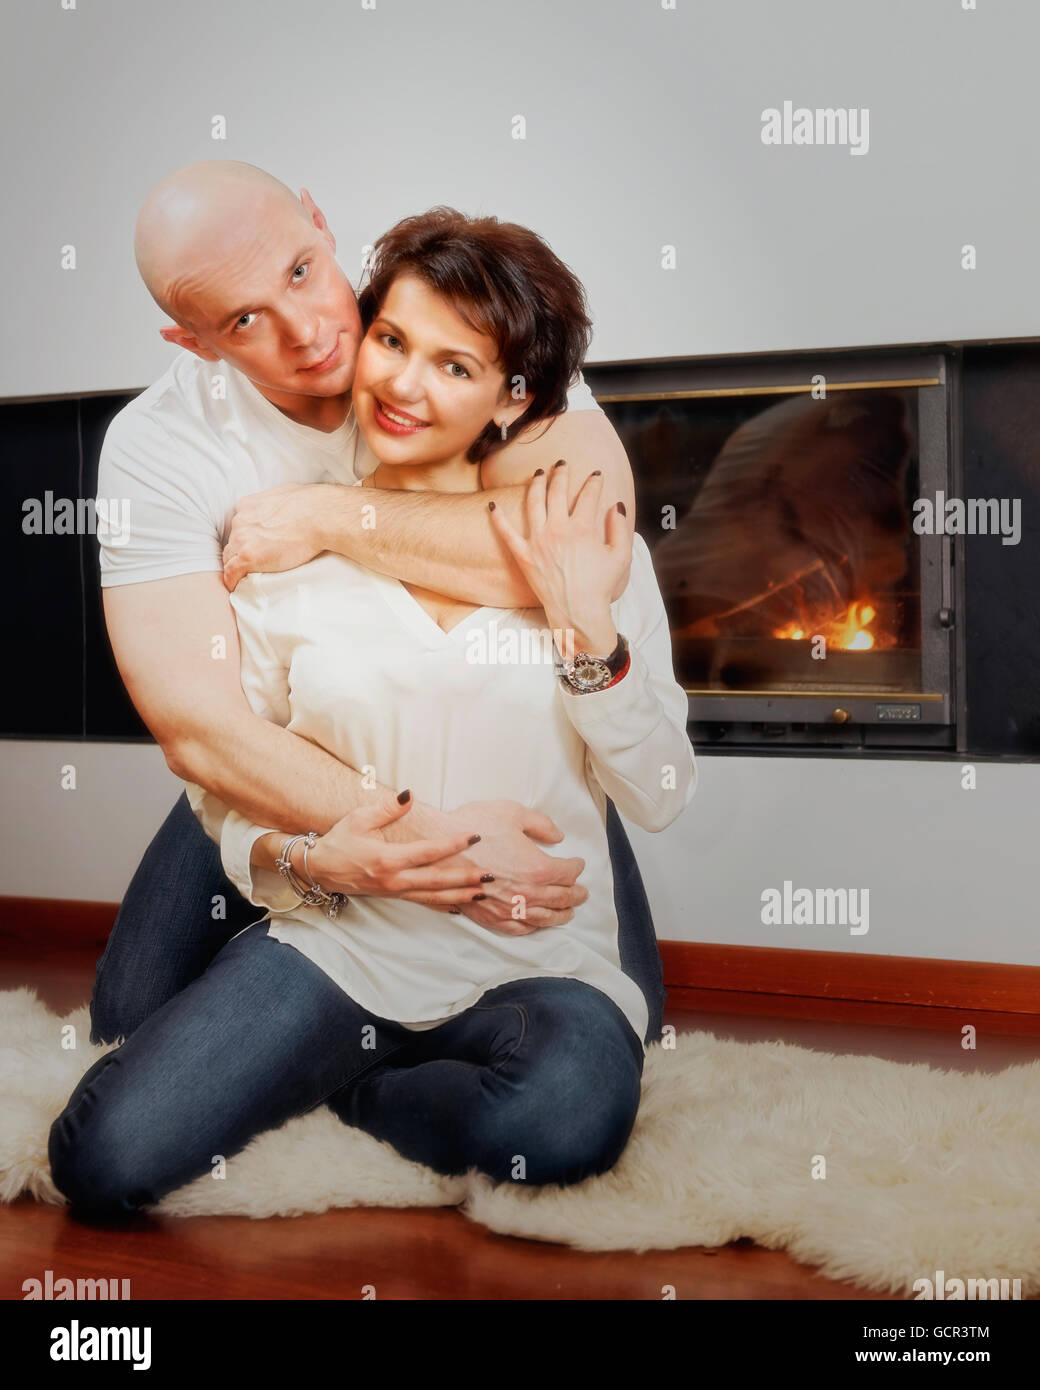 Romantic couple of brunette woman and bald headed man sitting on the fur carpet near fireplace. Fire in the fireplace is burning. Stock Photo